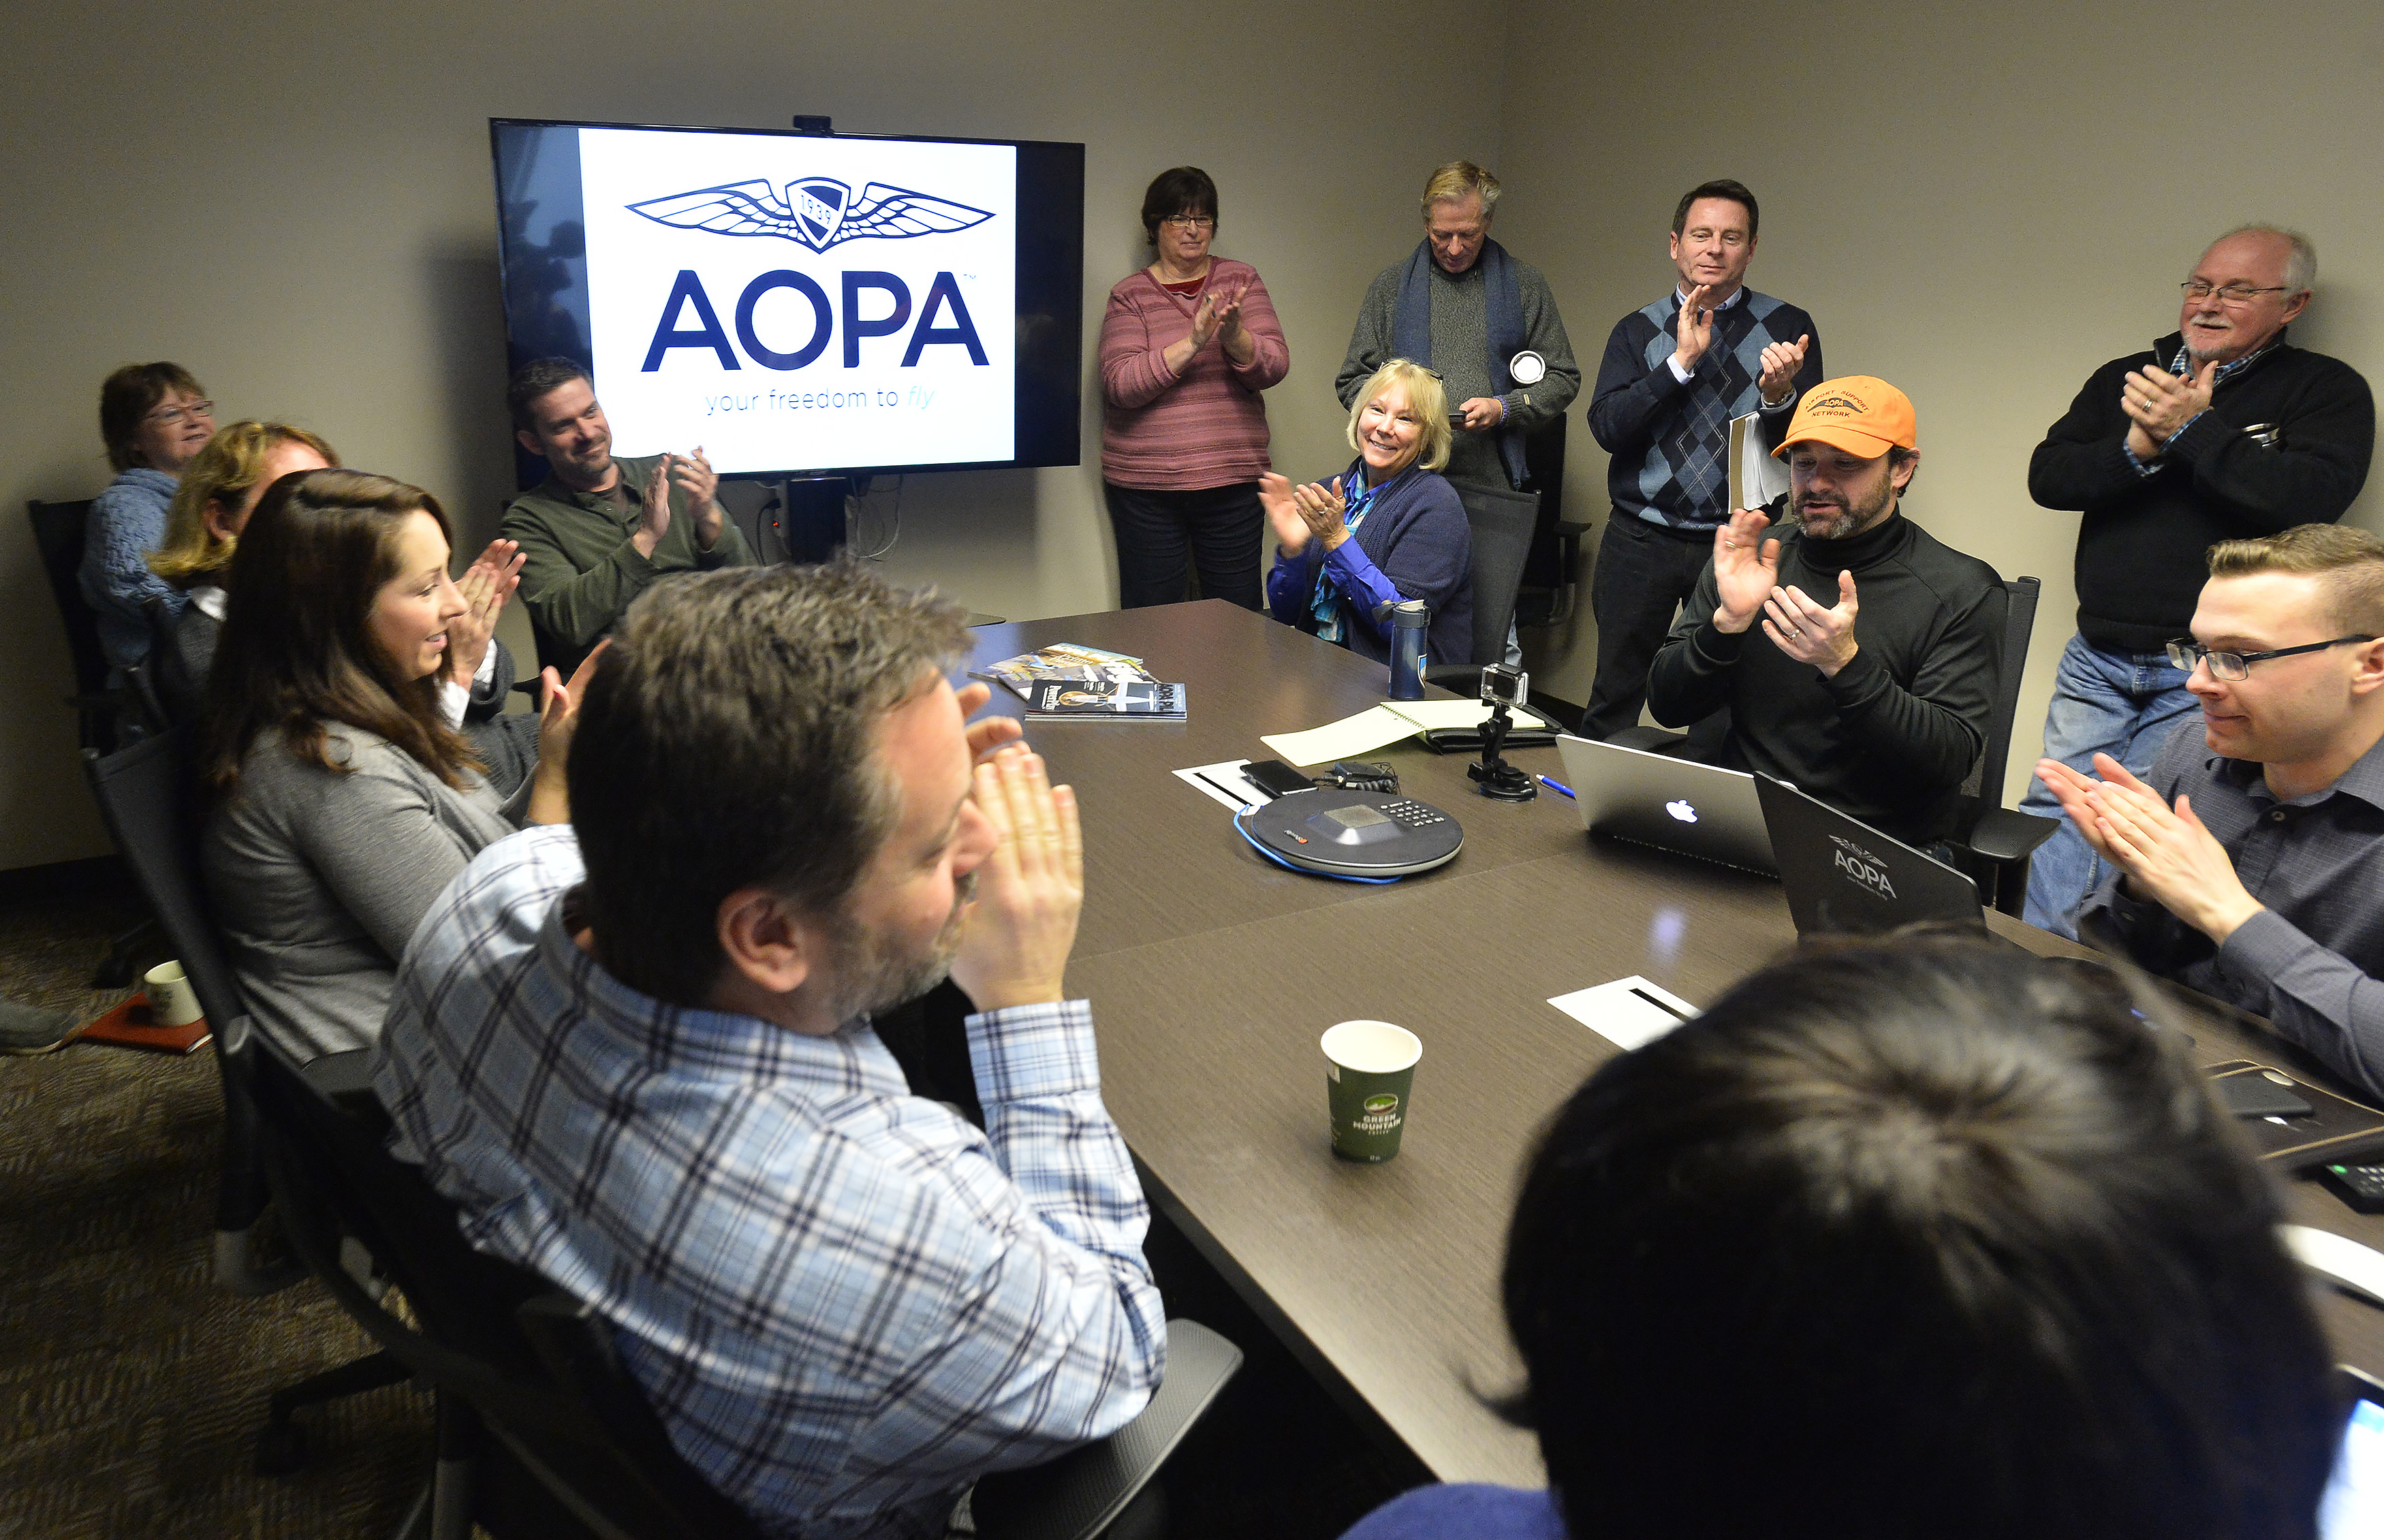 AOPA staff members applaud after an FAA announcement involving the final rule for third class medical reform, called BasicMed, which goes into effect May 1. Photo by David Tulis.